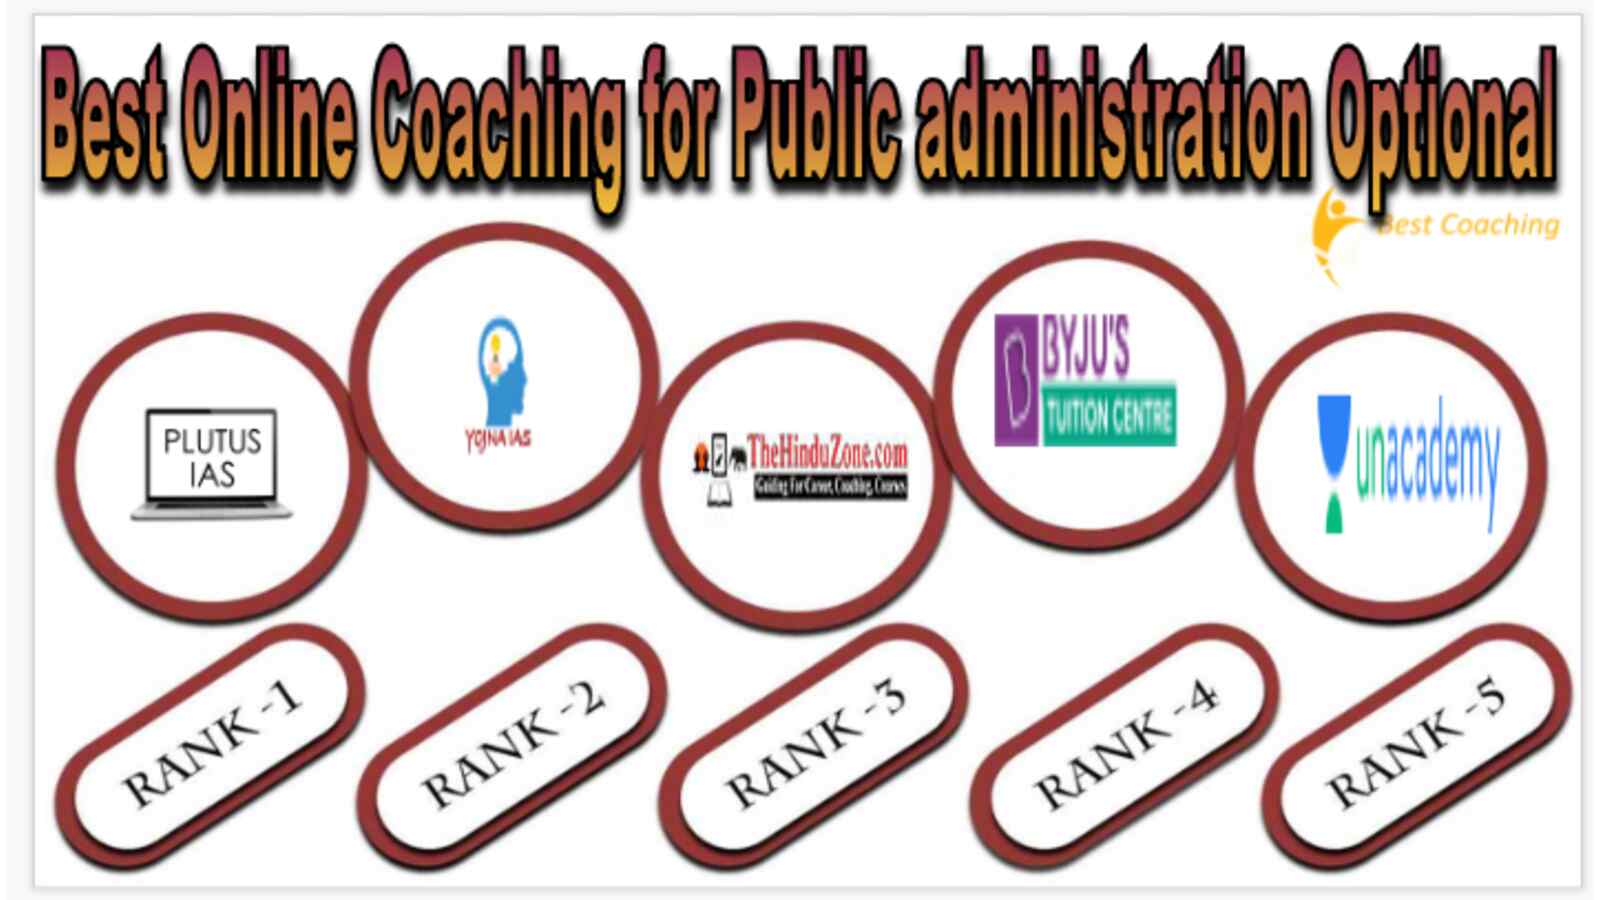 Best Online Coaching for Public administration Optional